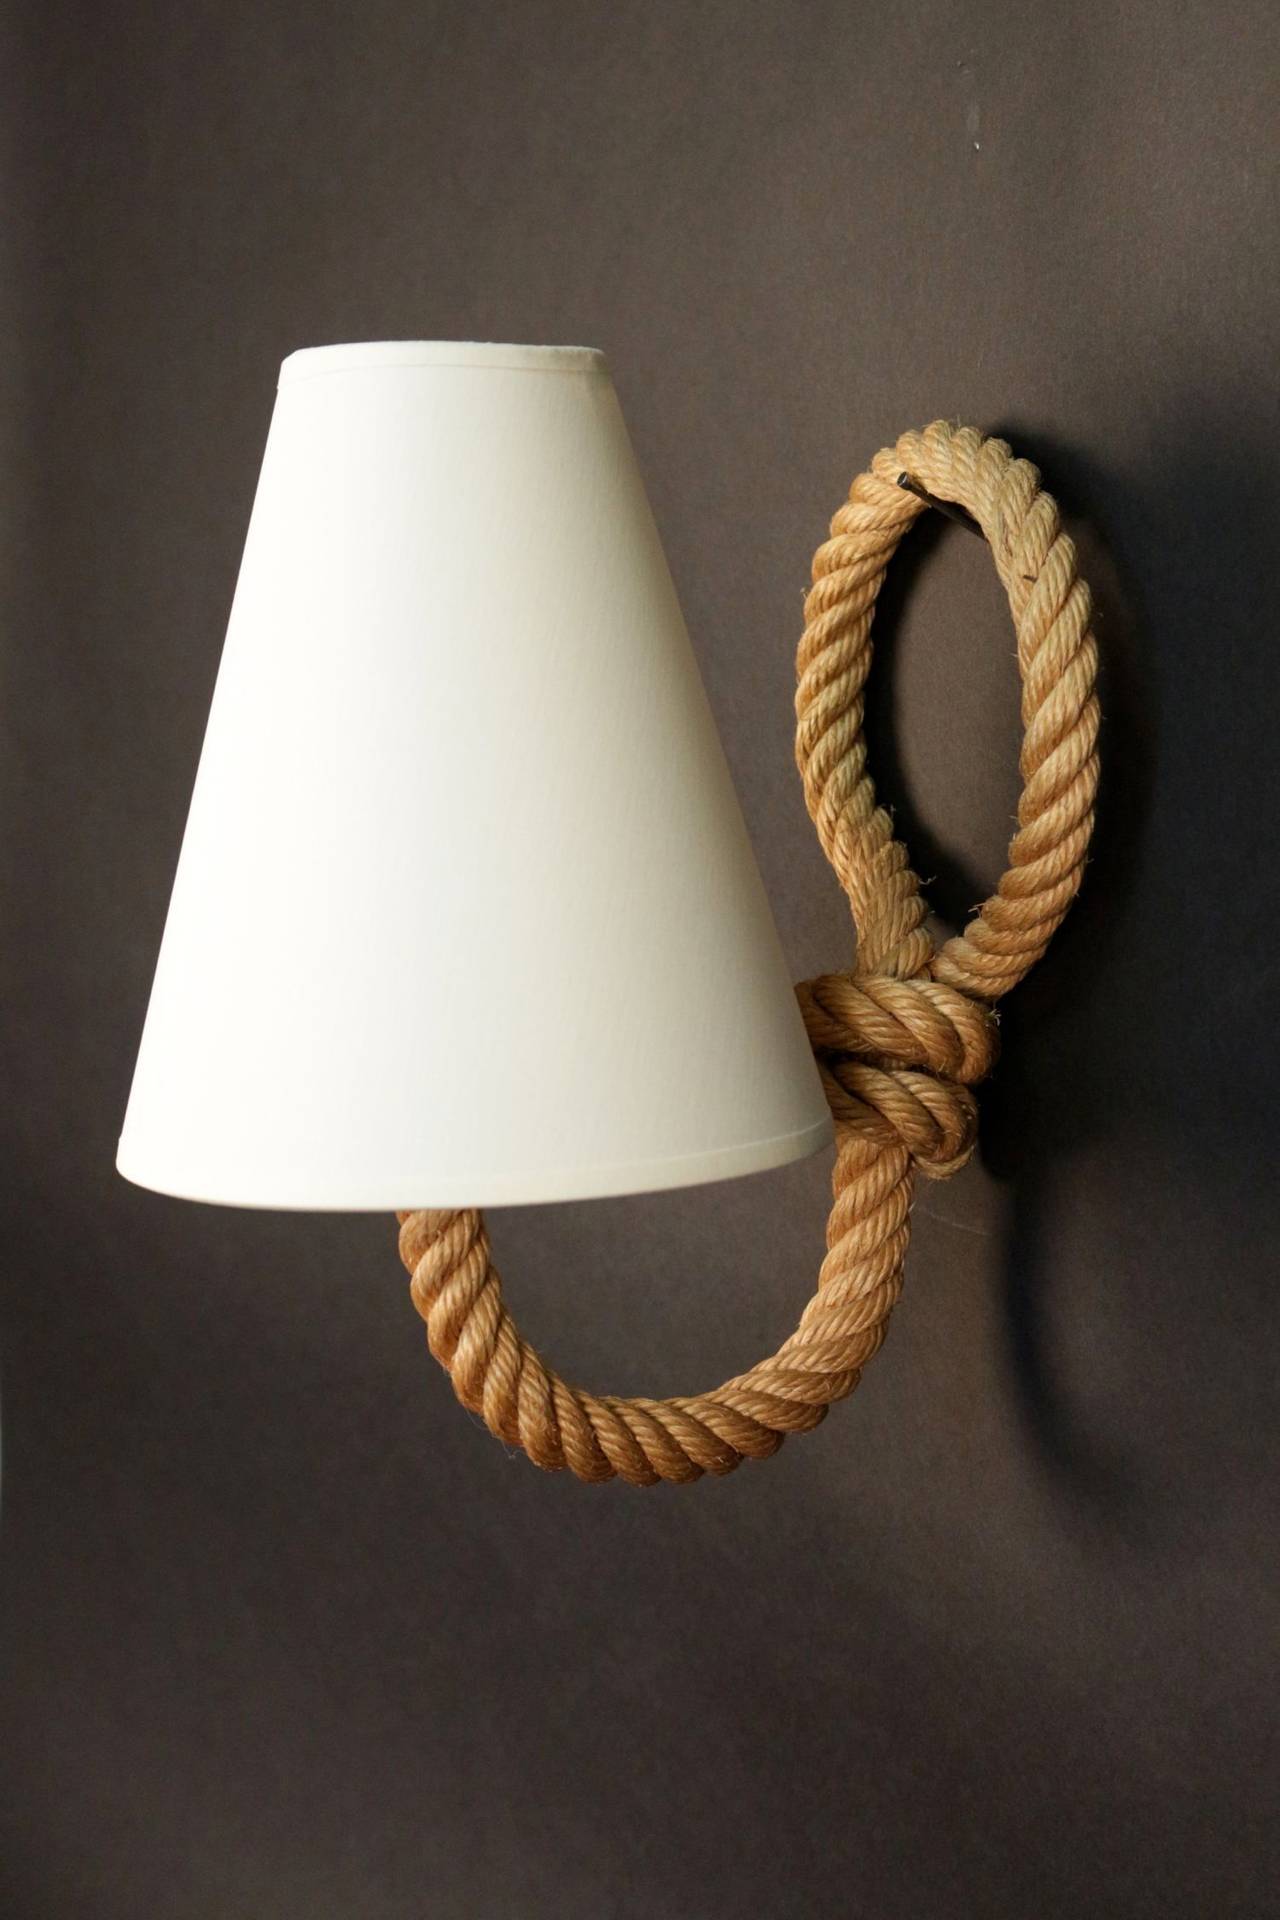 1950s set of rope three sconces by Adrien Audoux and Frida Minet
One lighted arm per sconce. 
New lamp shade.
Adrien Audoux and Frida Minet are known for their rope lights and furniture. Their first workshop have been founded in 1929 at